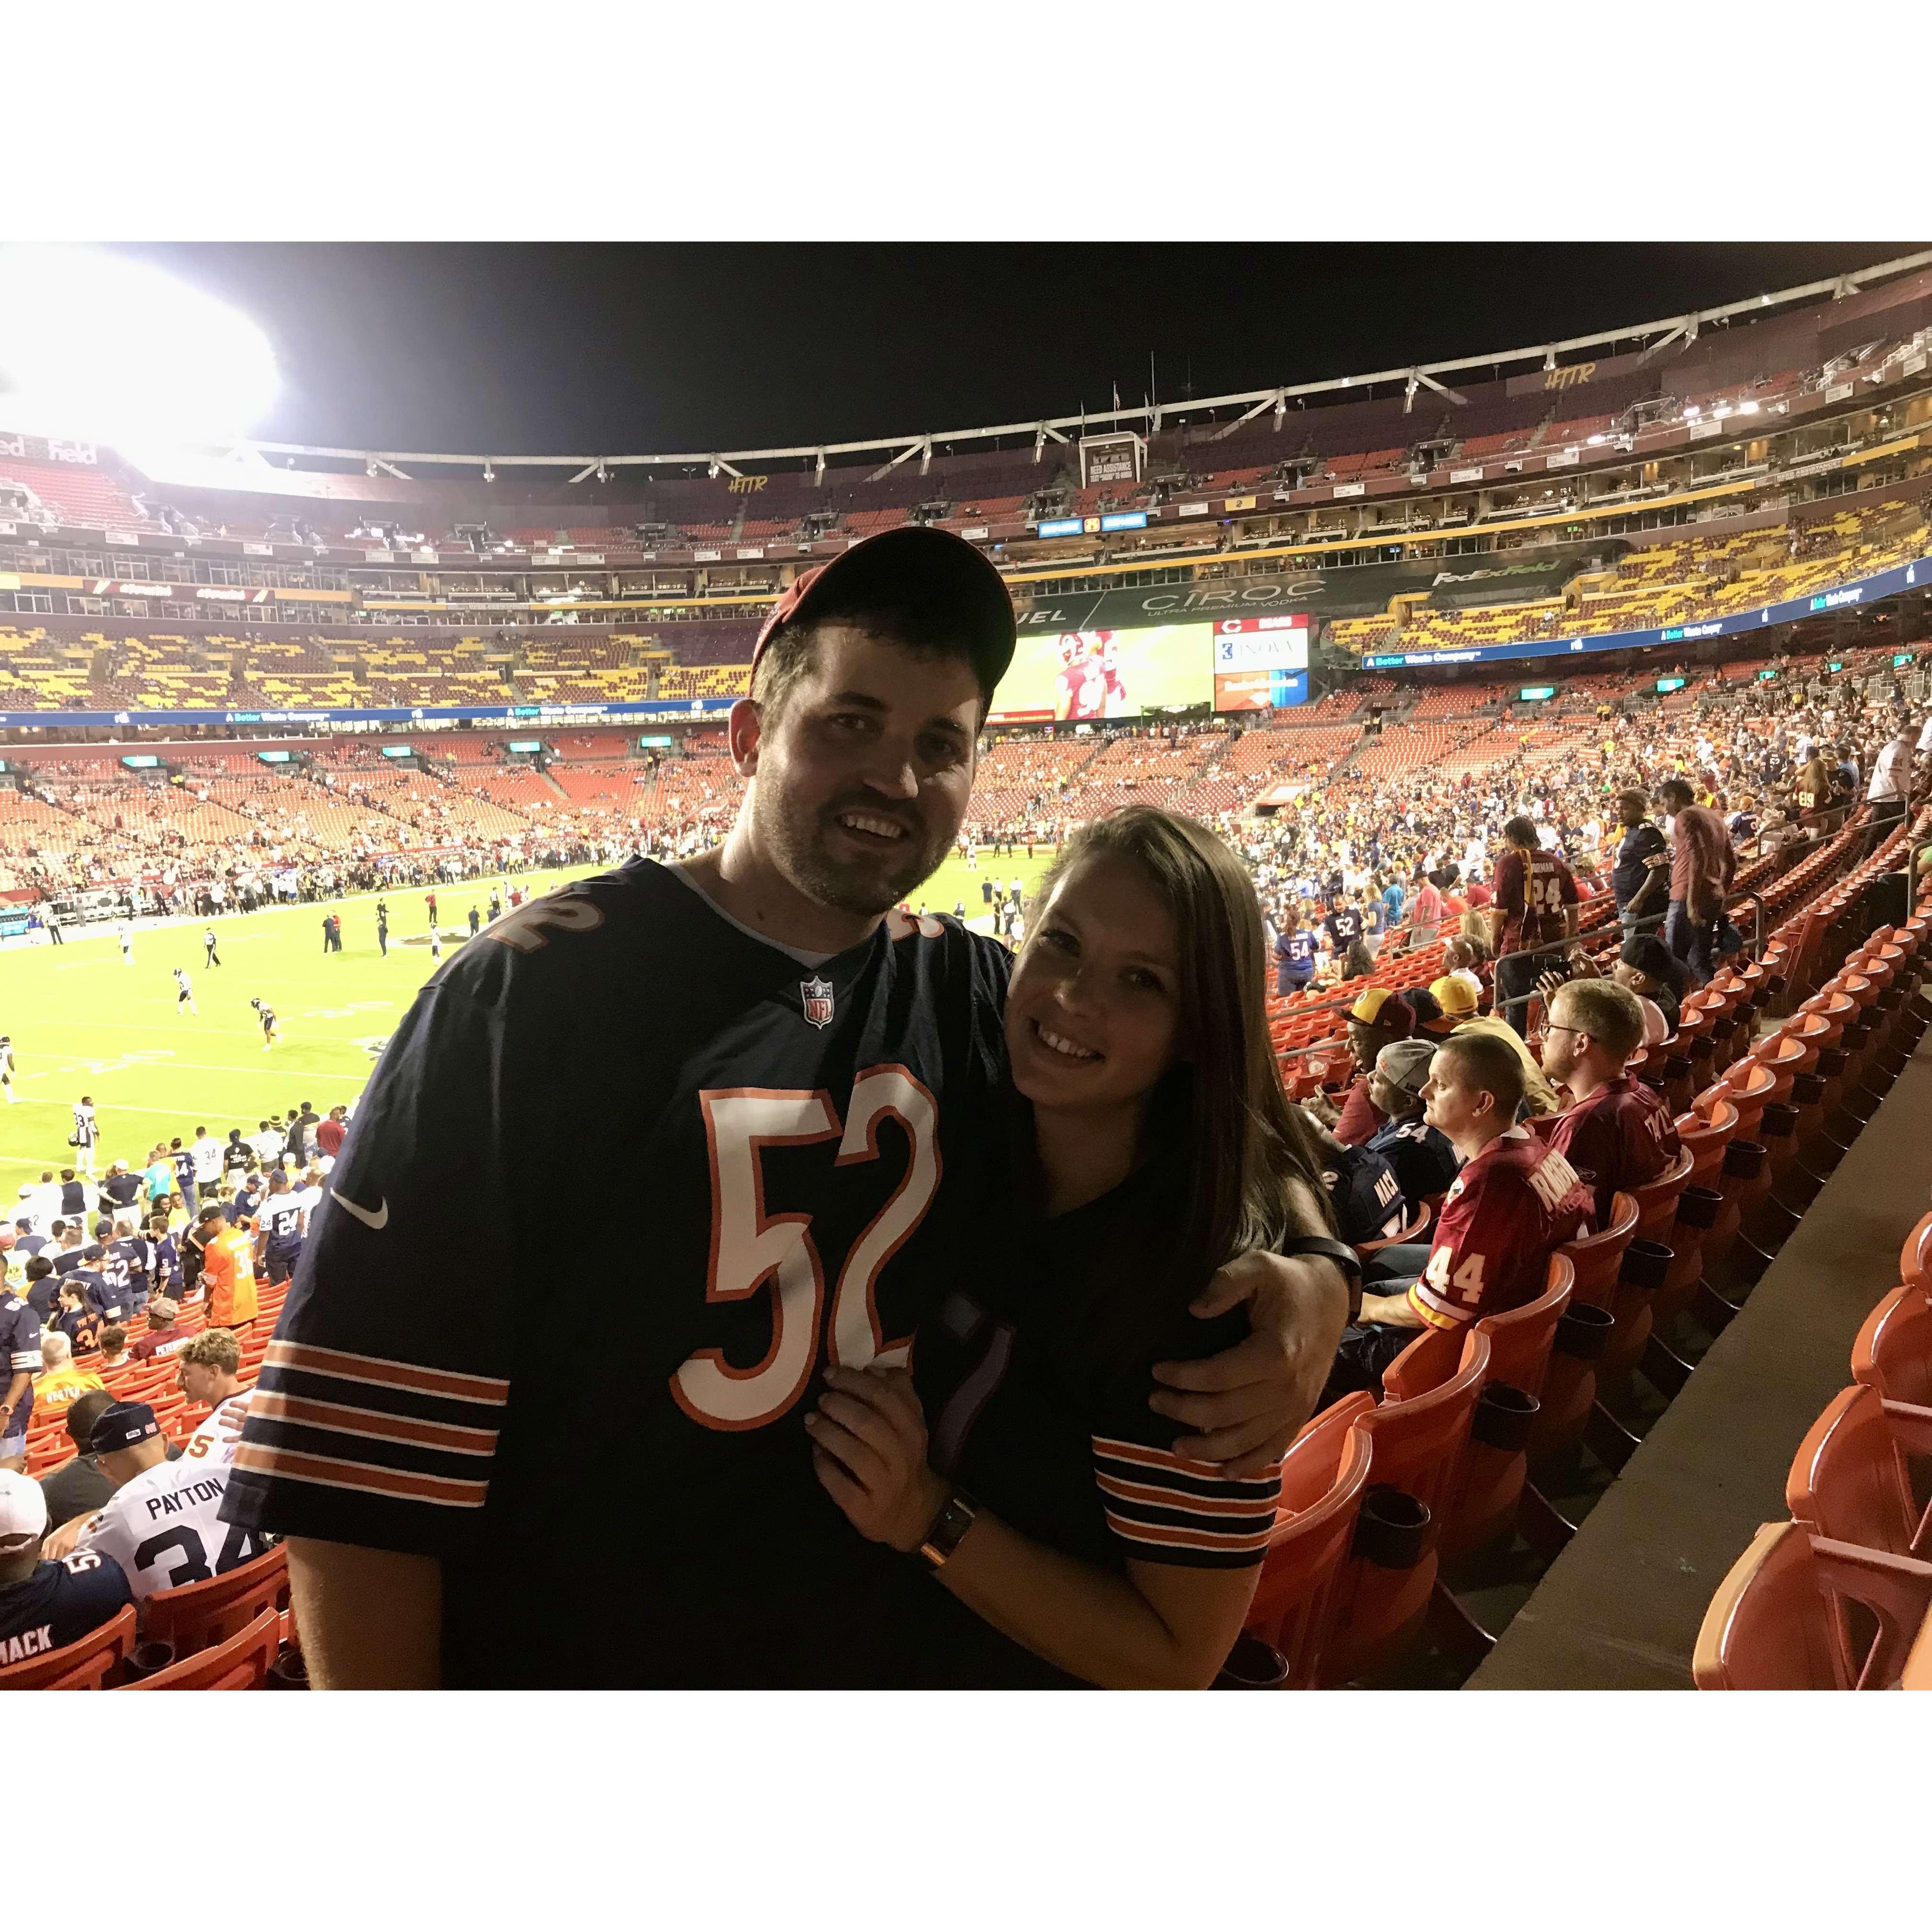 Somehow I converted him to a bears fan